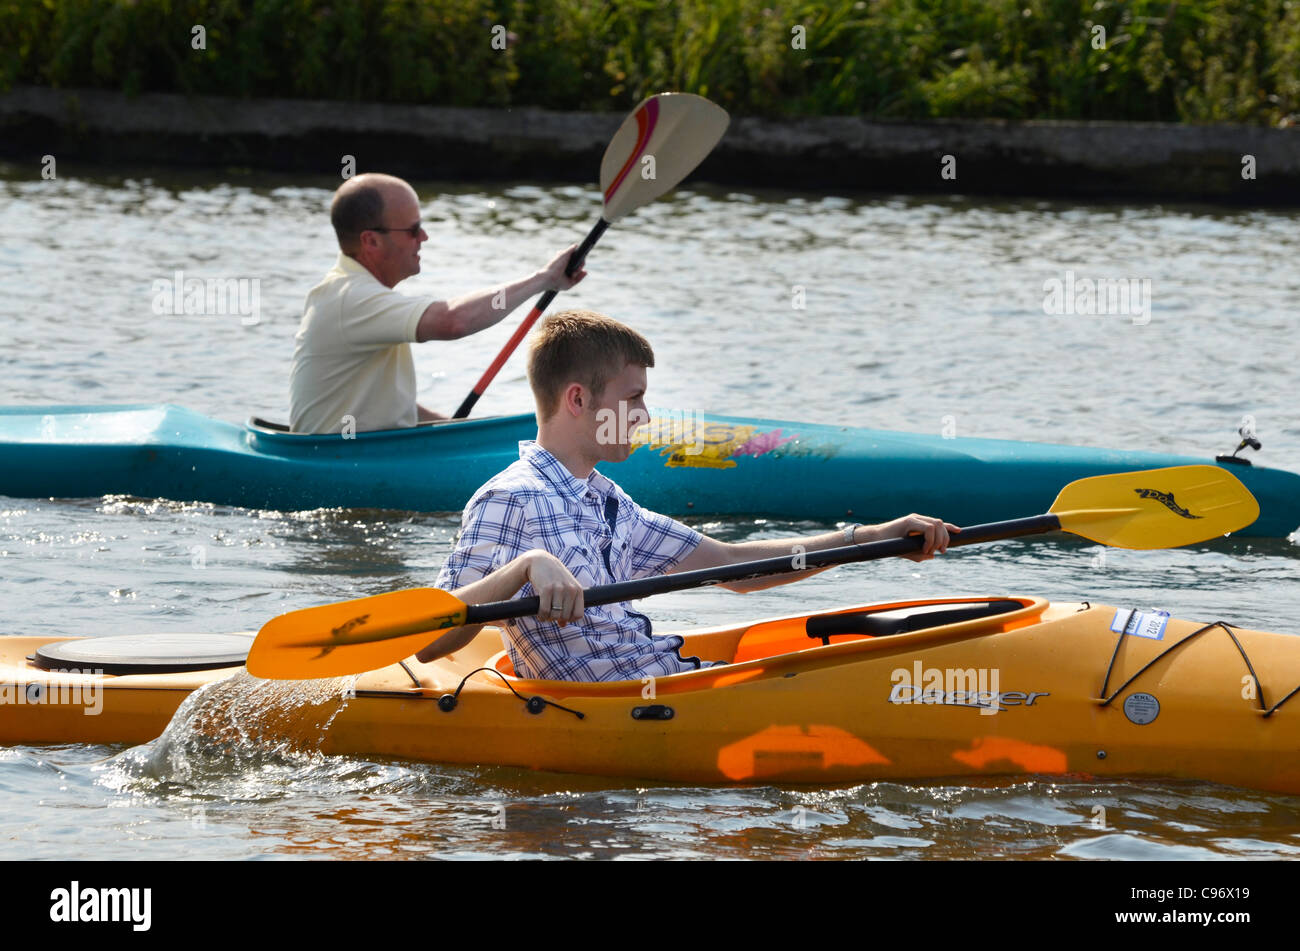 canoeing with no lifejackets Stock Photo